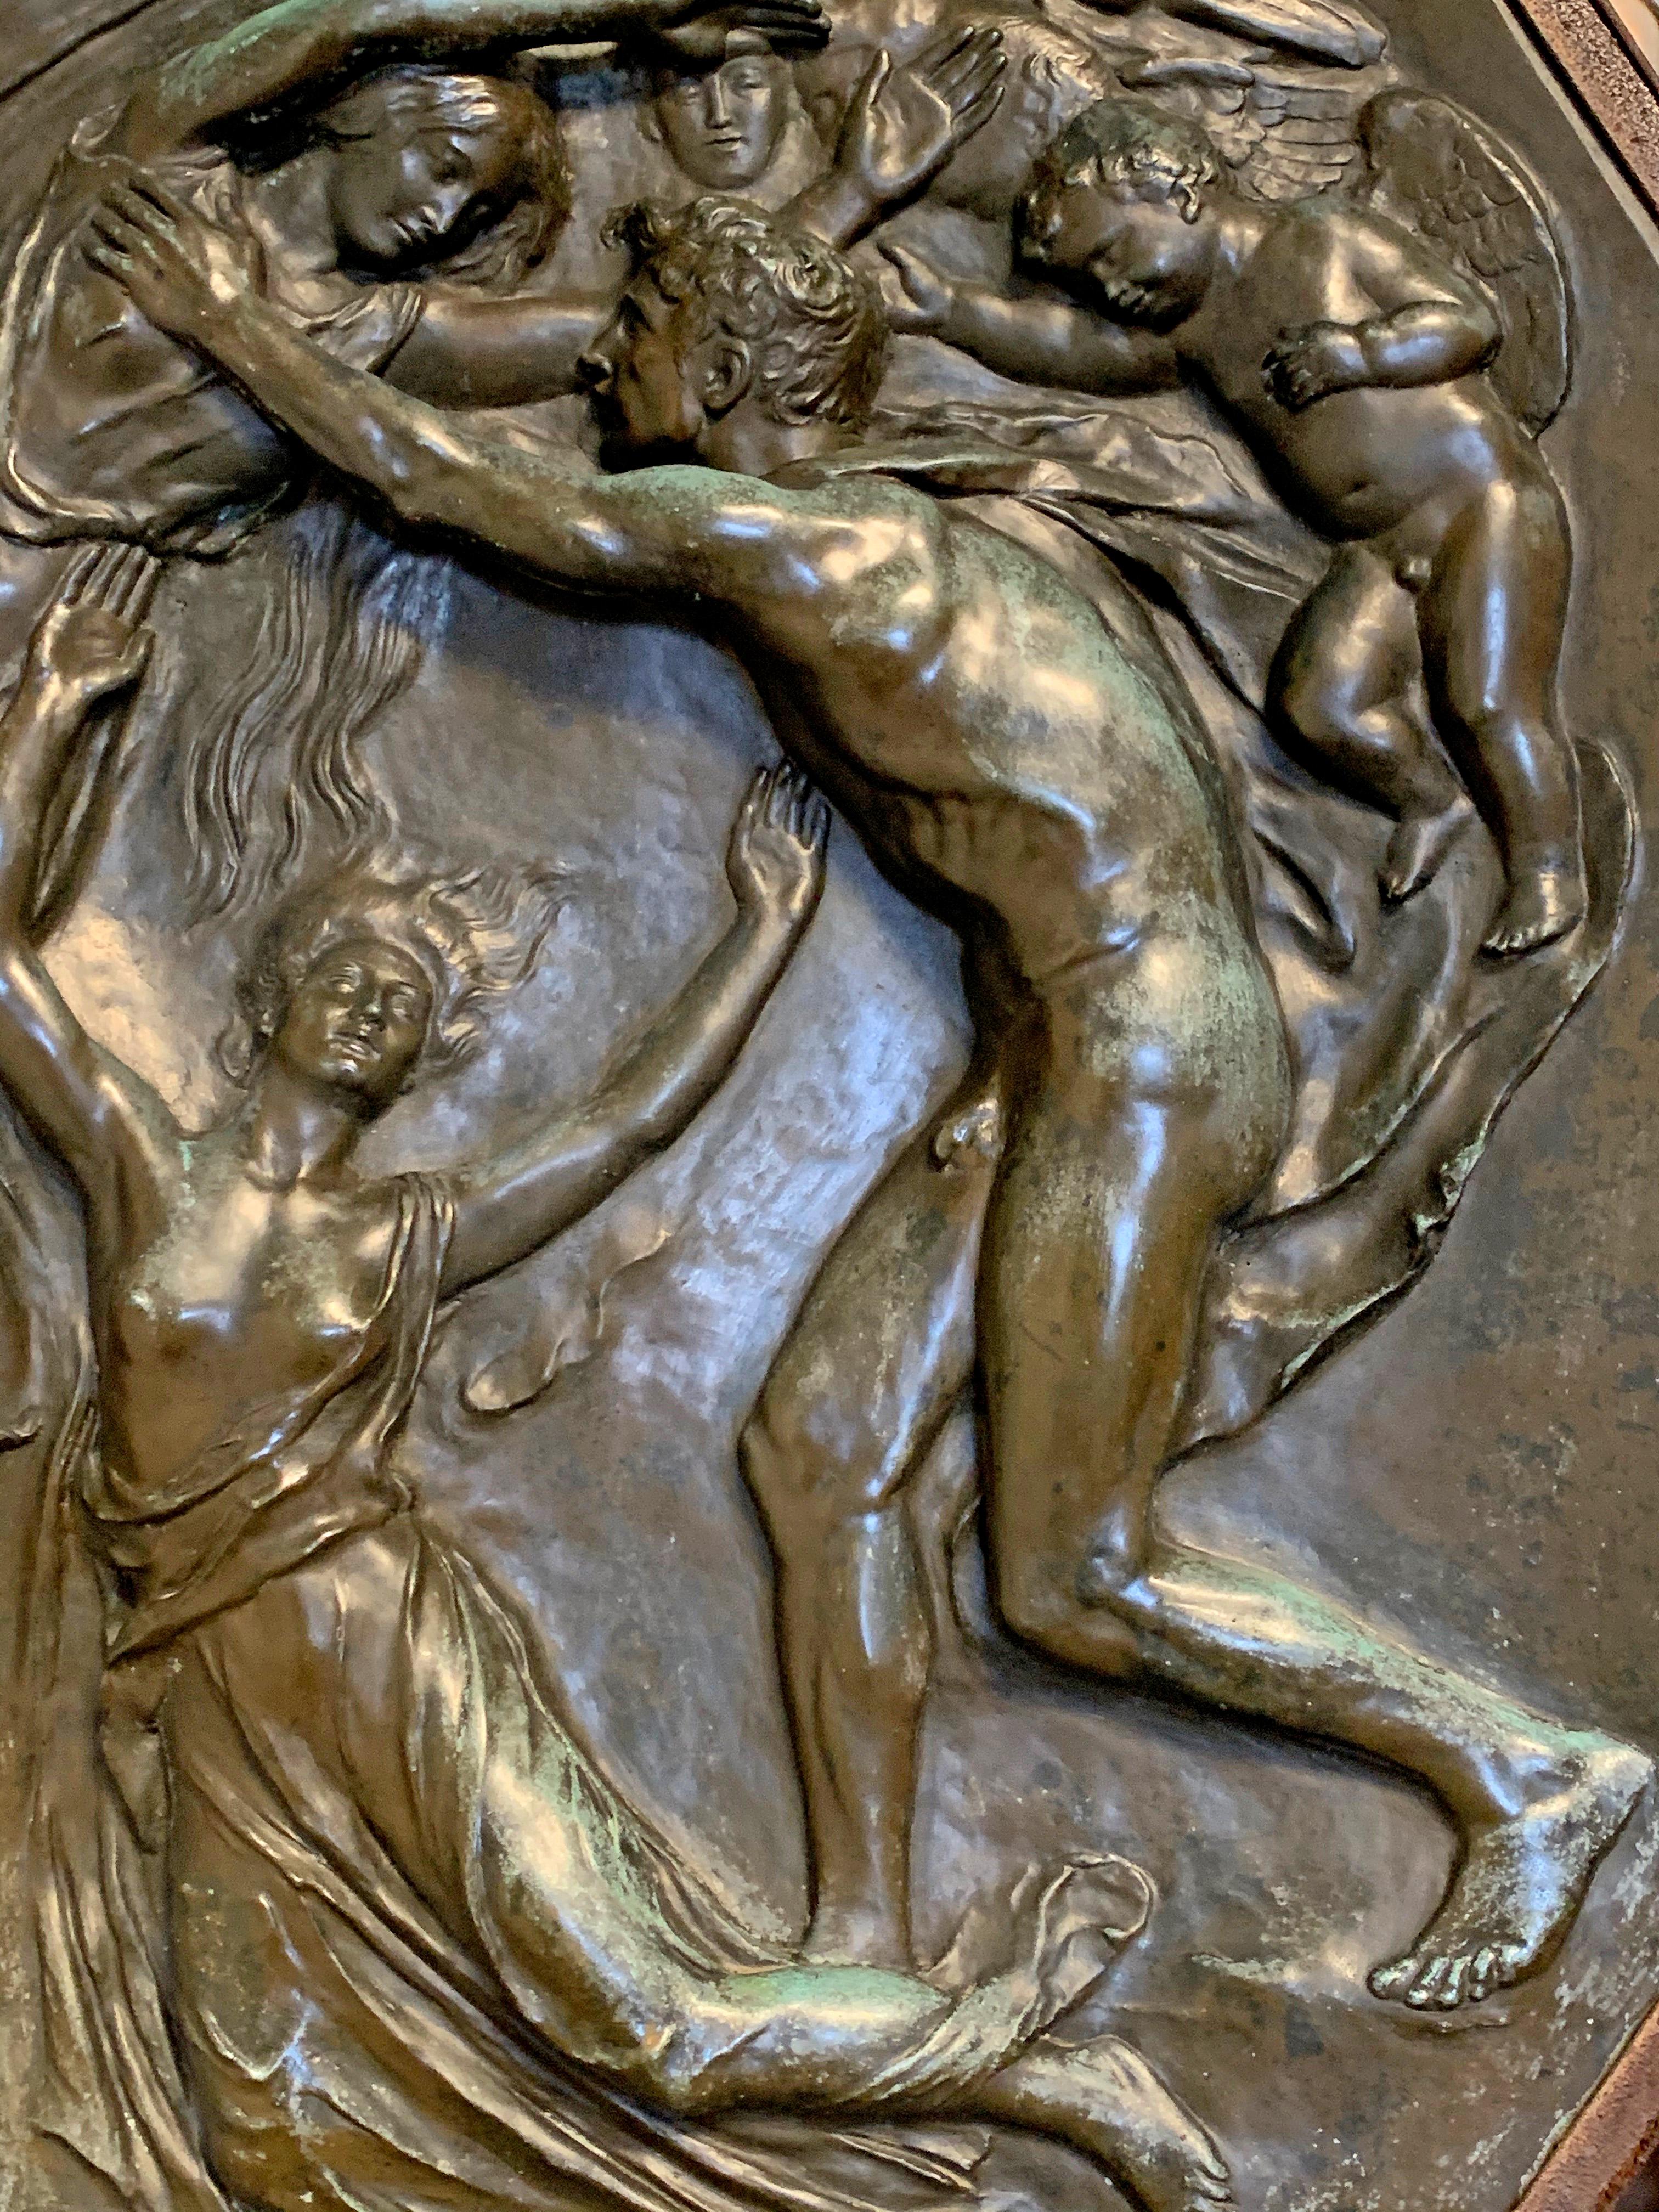 Demonstrating his mastery of allegorical subjects and the nude figure, this large octagonal sculptural bronze panel, featuring a nude male figure reaching out to constrain the rising spirit of his expired love, was created by Henry Alfred Pegram,